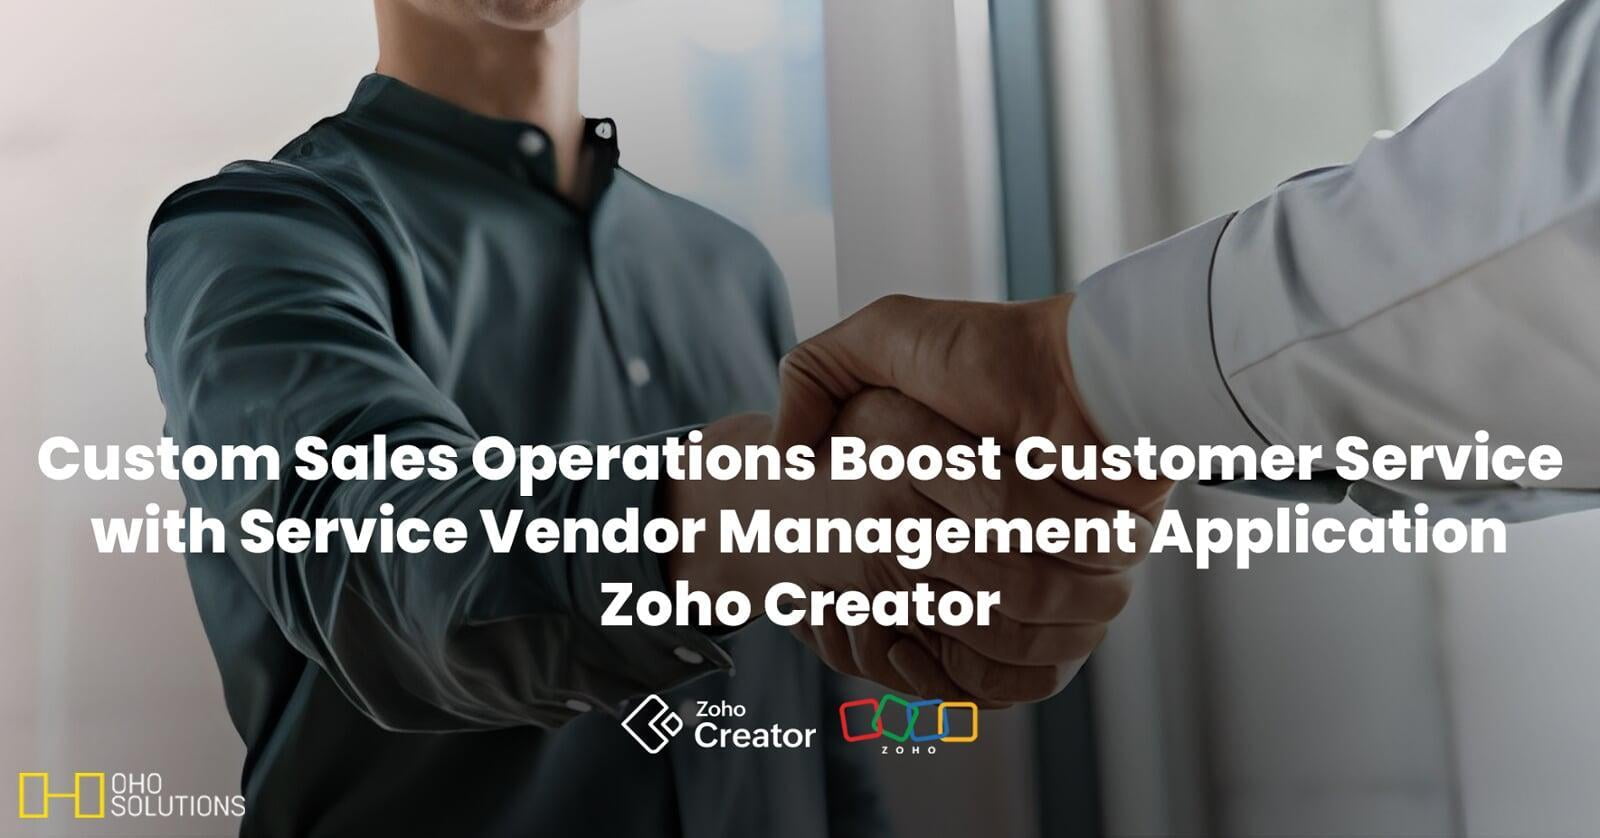 How Infinity Traders streamlined its sales management and enhanced their customer relationships with Zoho products